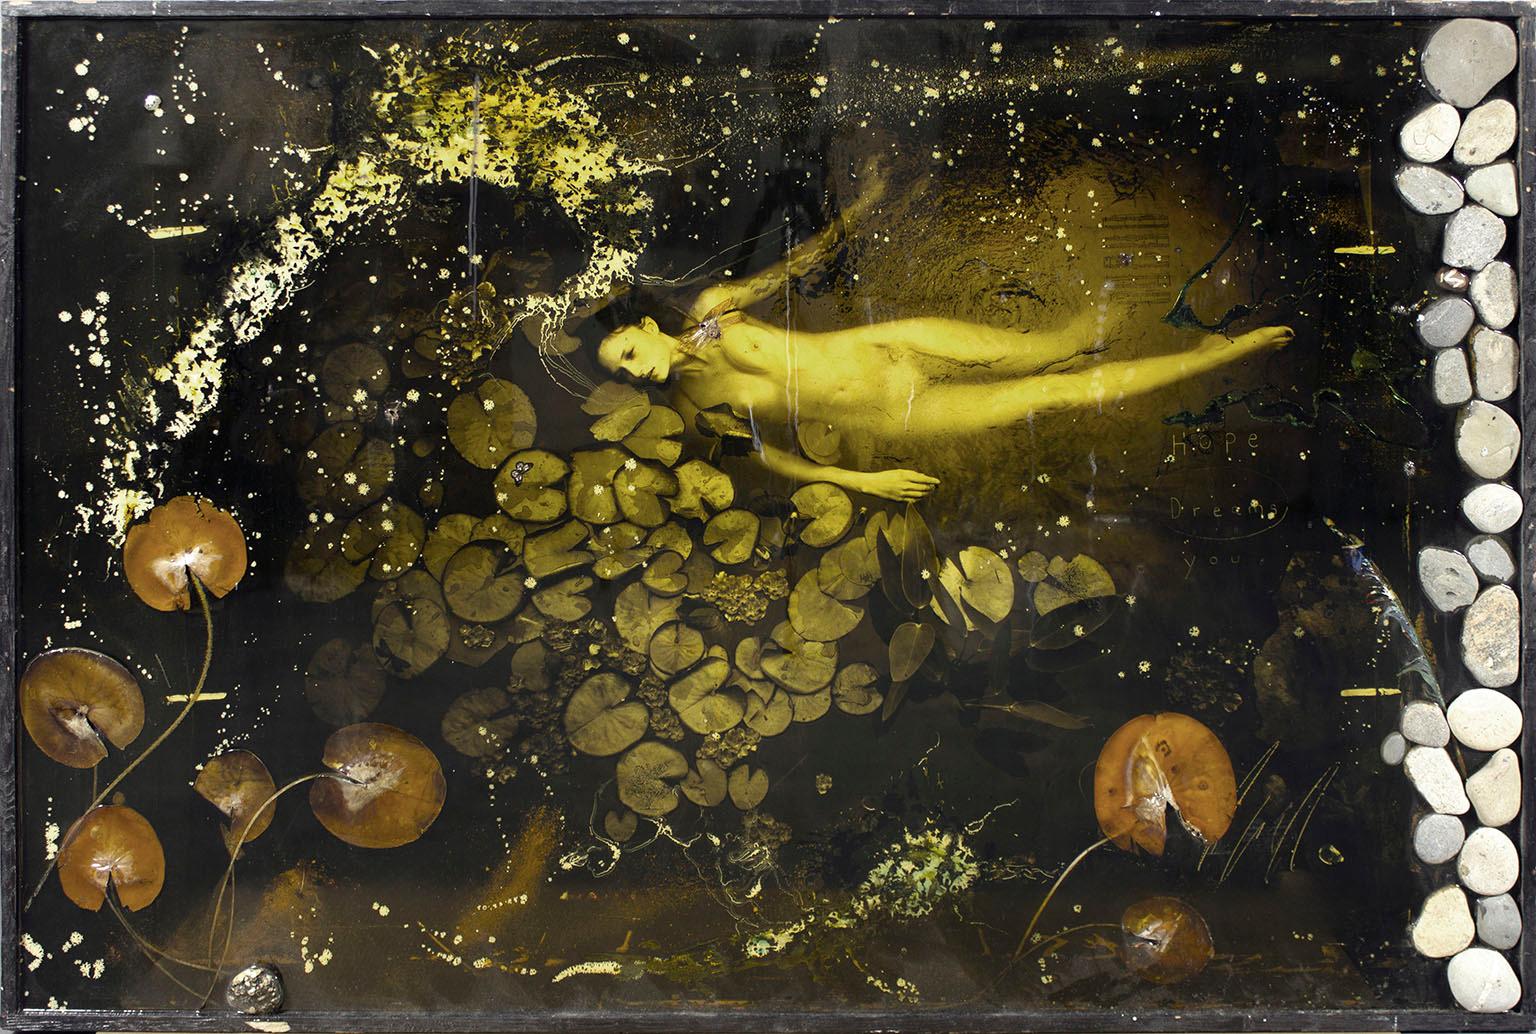 Raphael Mazzucco Figurative Print - "Coda" archival print, oil paint and mixed media work encased in resin 